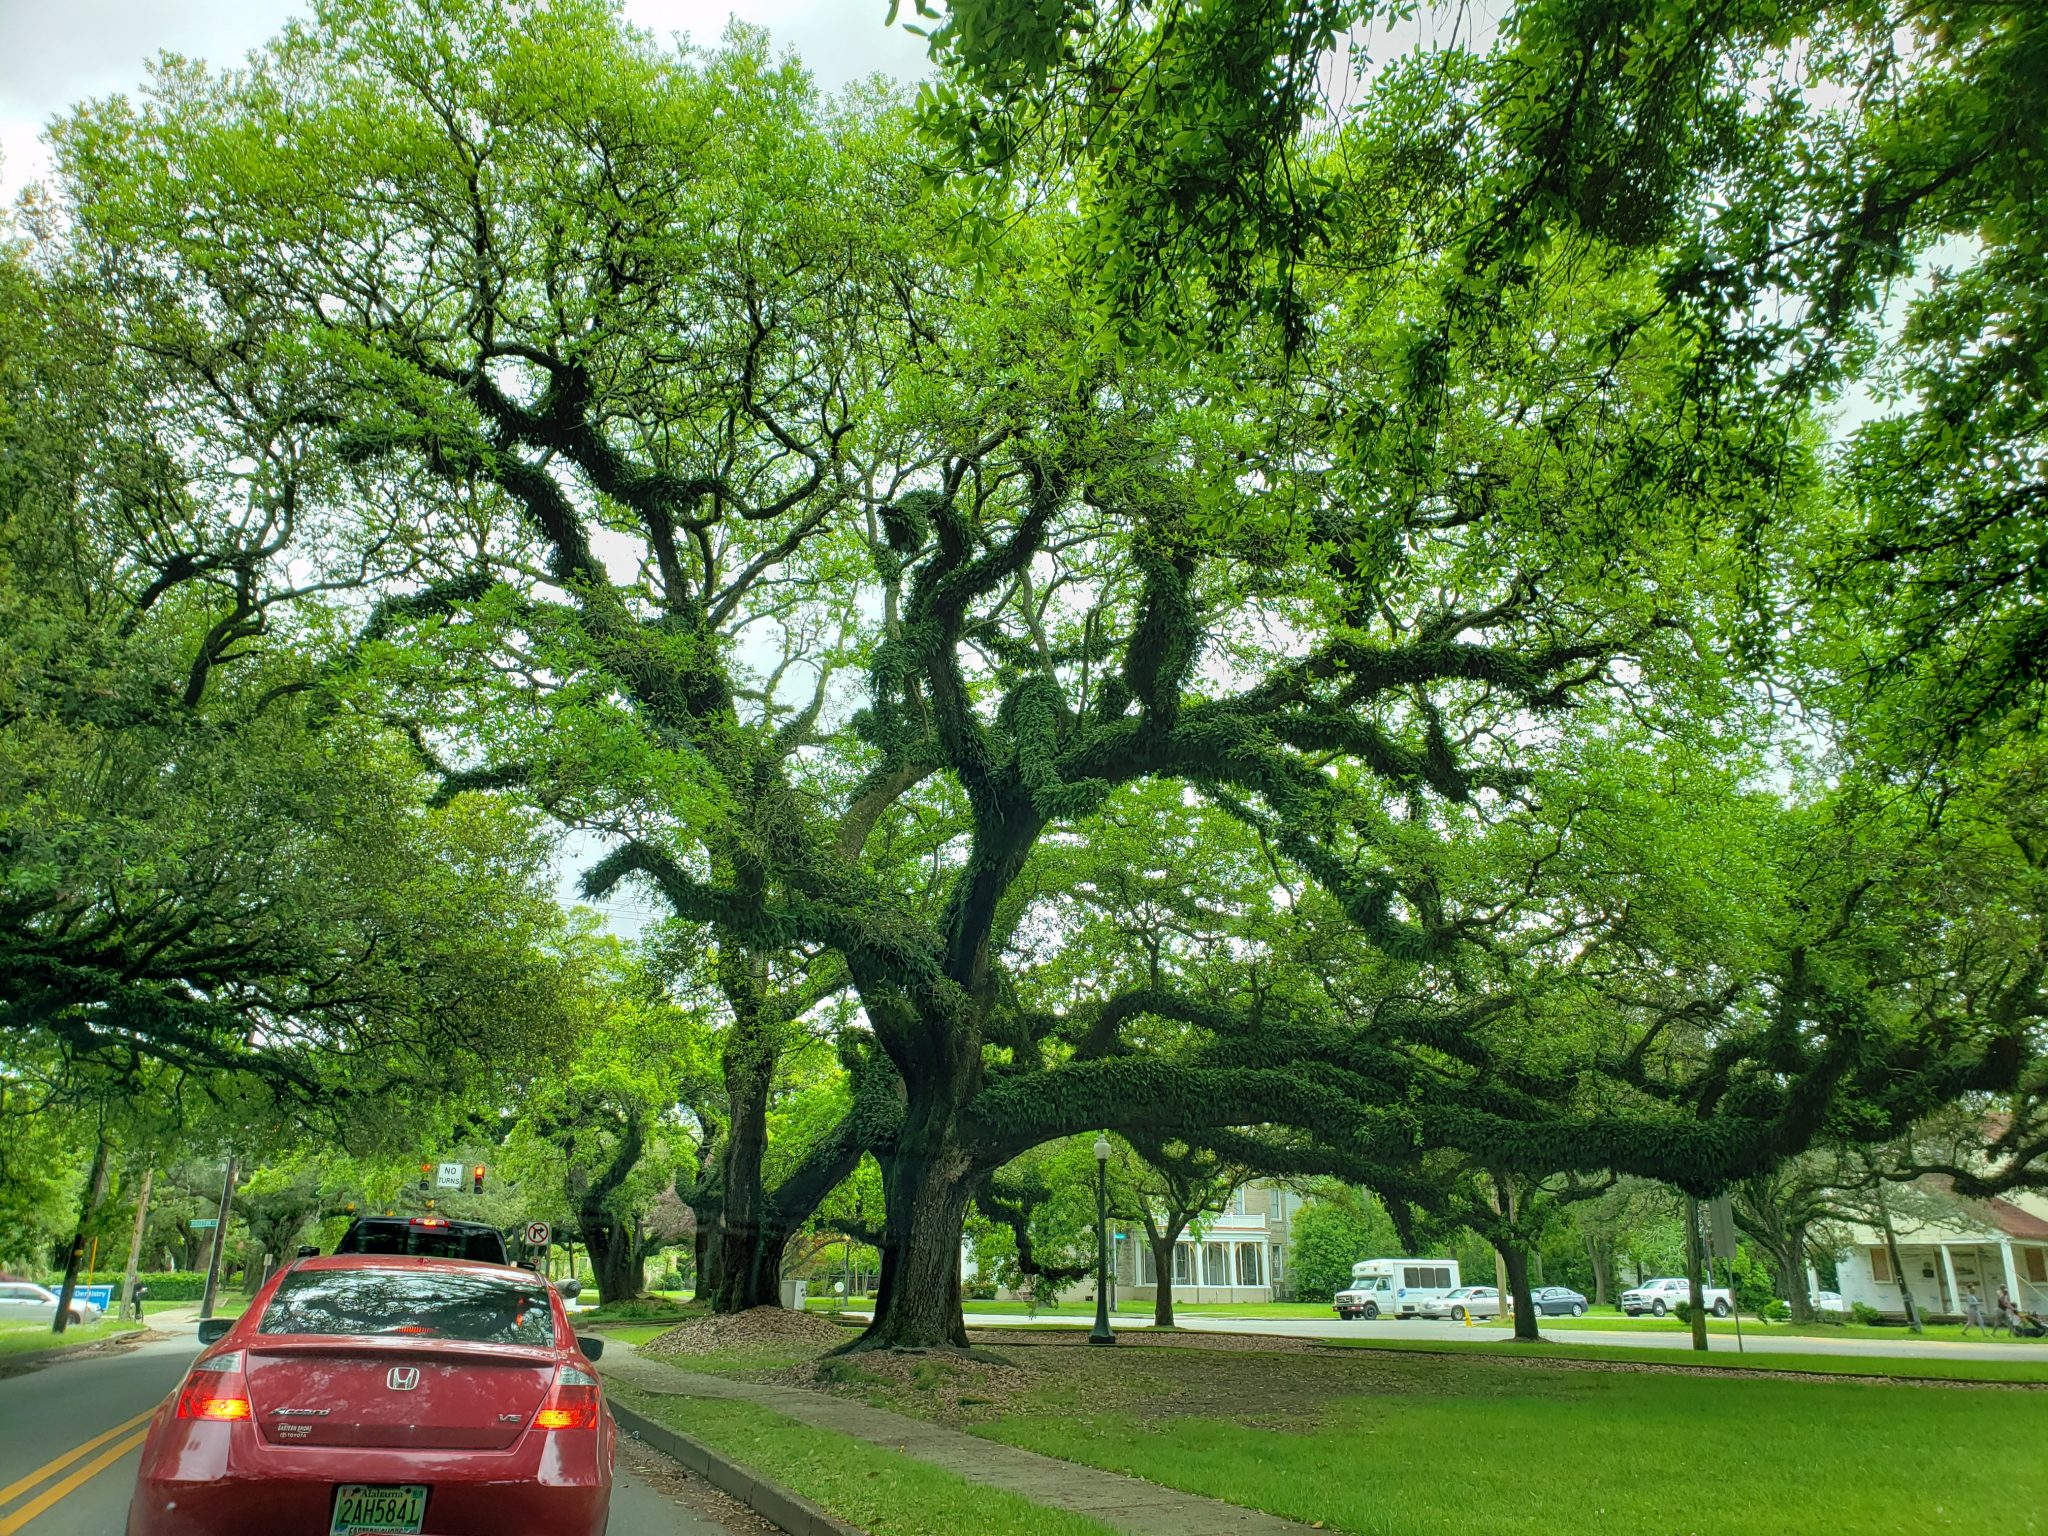 American Street Trees – Are We Providing Them for Future Generations?